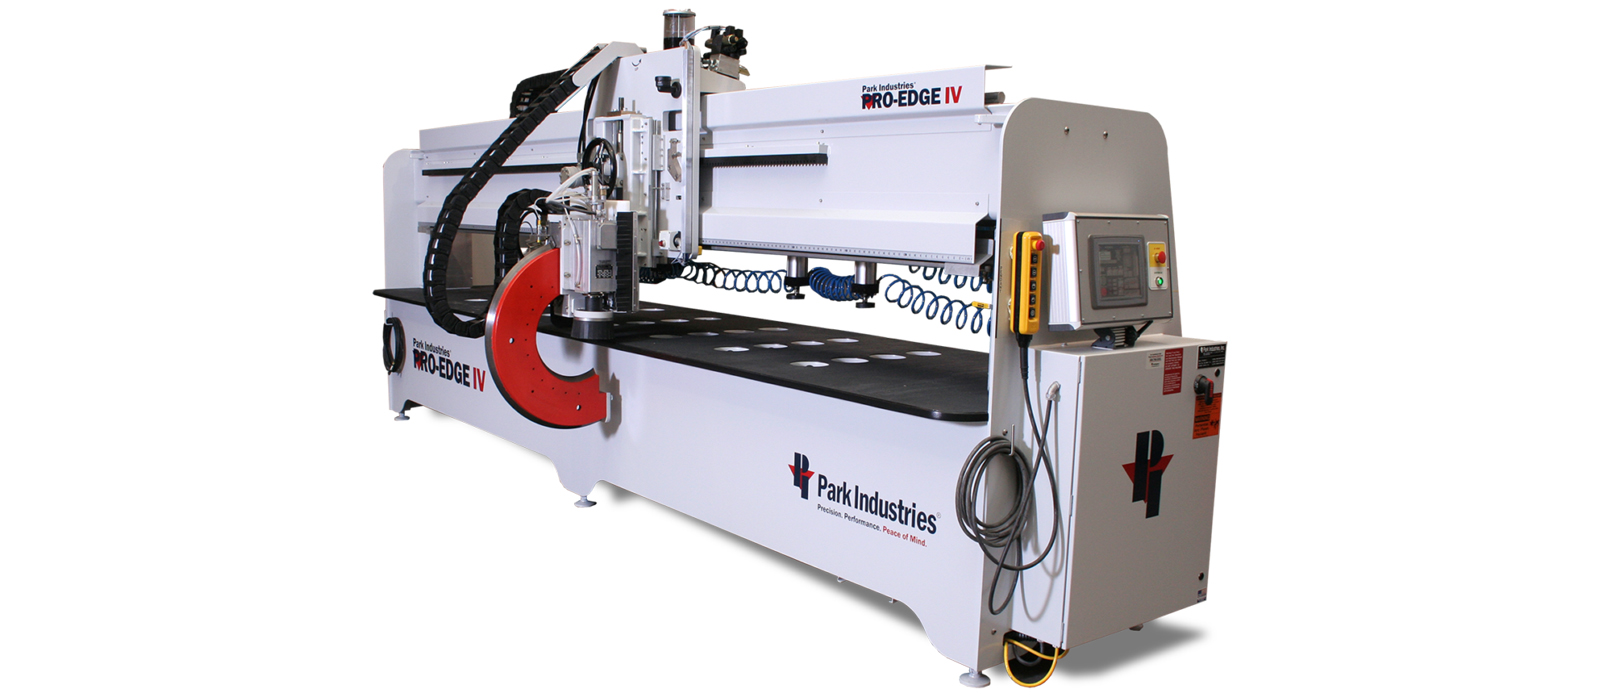 Pro-Edge IV Automatic Edge Shaper and Polisher for Stone Fabrication from Park Industries